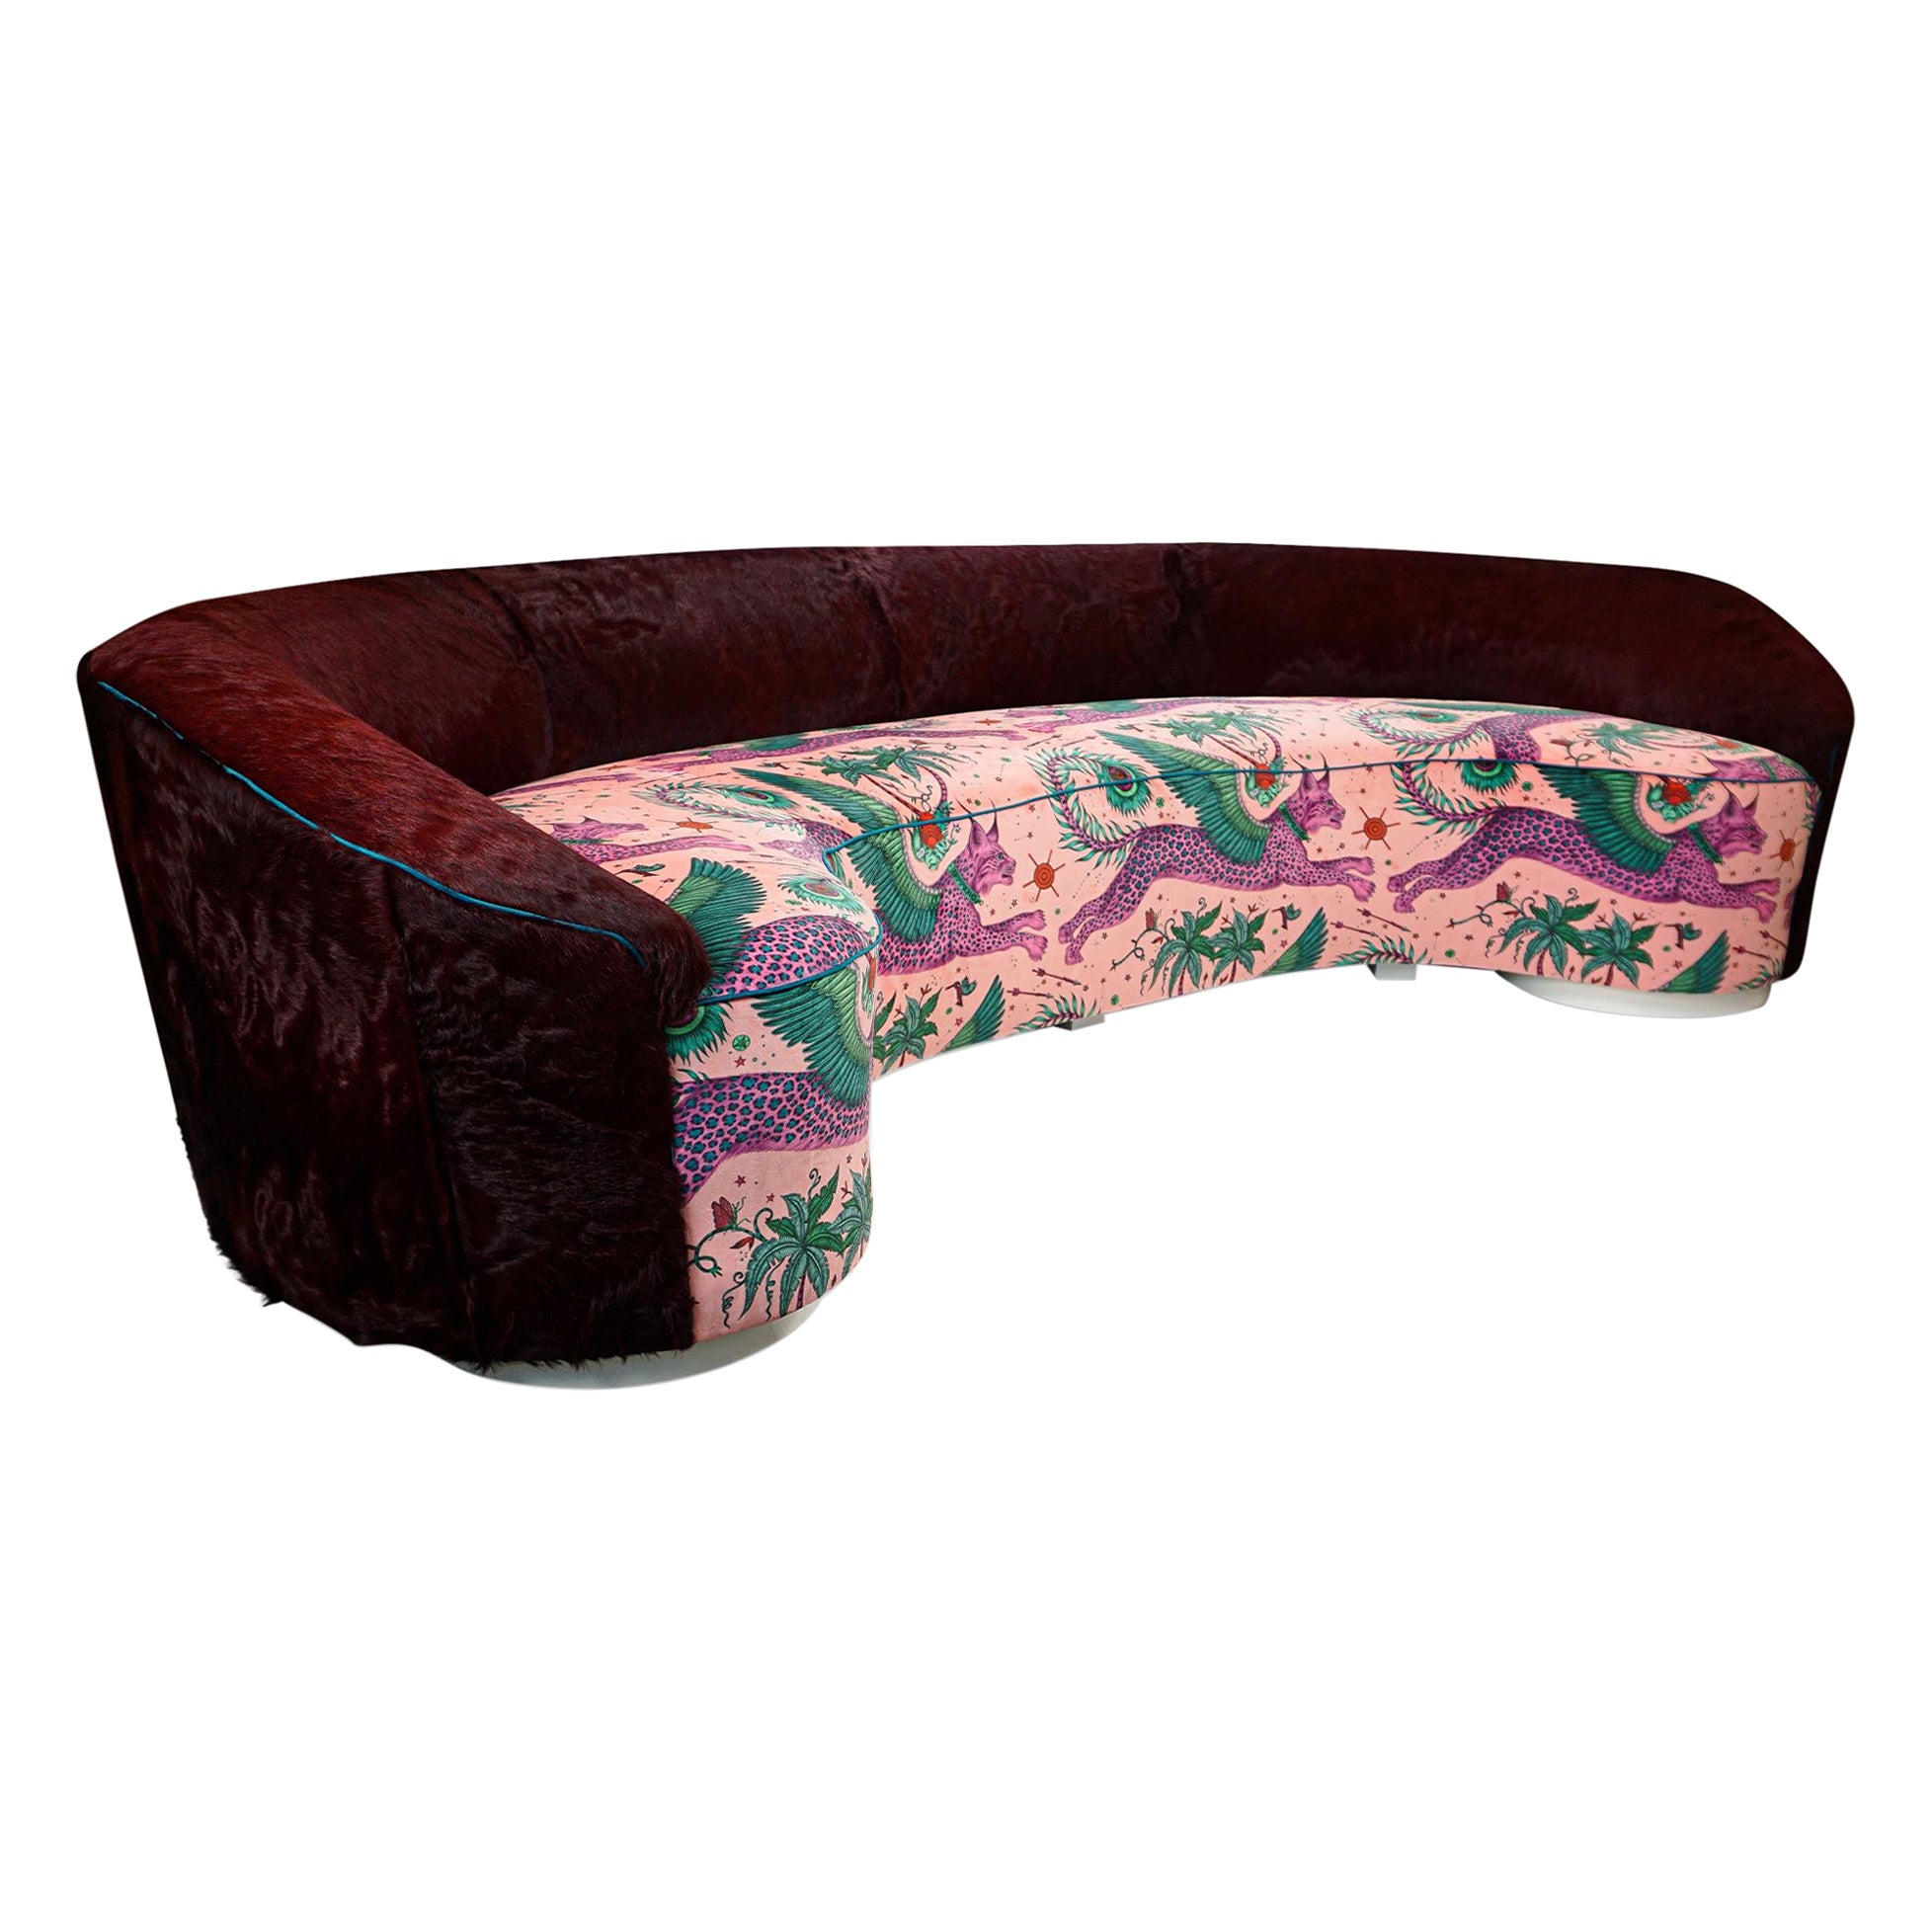 Curved Sofa with Oxblood Cowhide and Fantastical Printed Velvet, Slope Arm For Sale